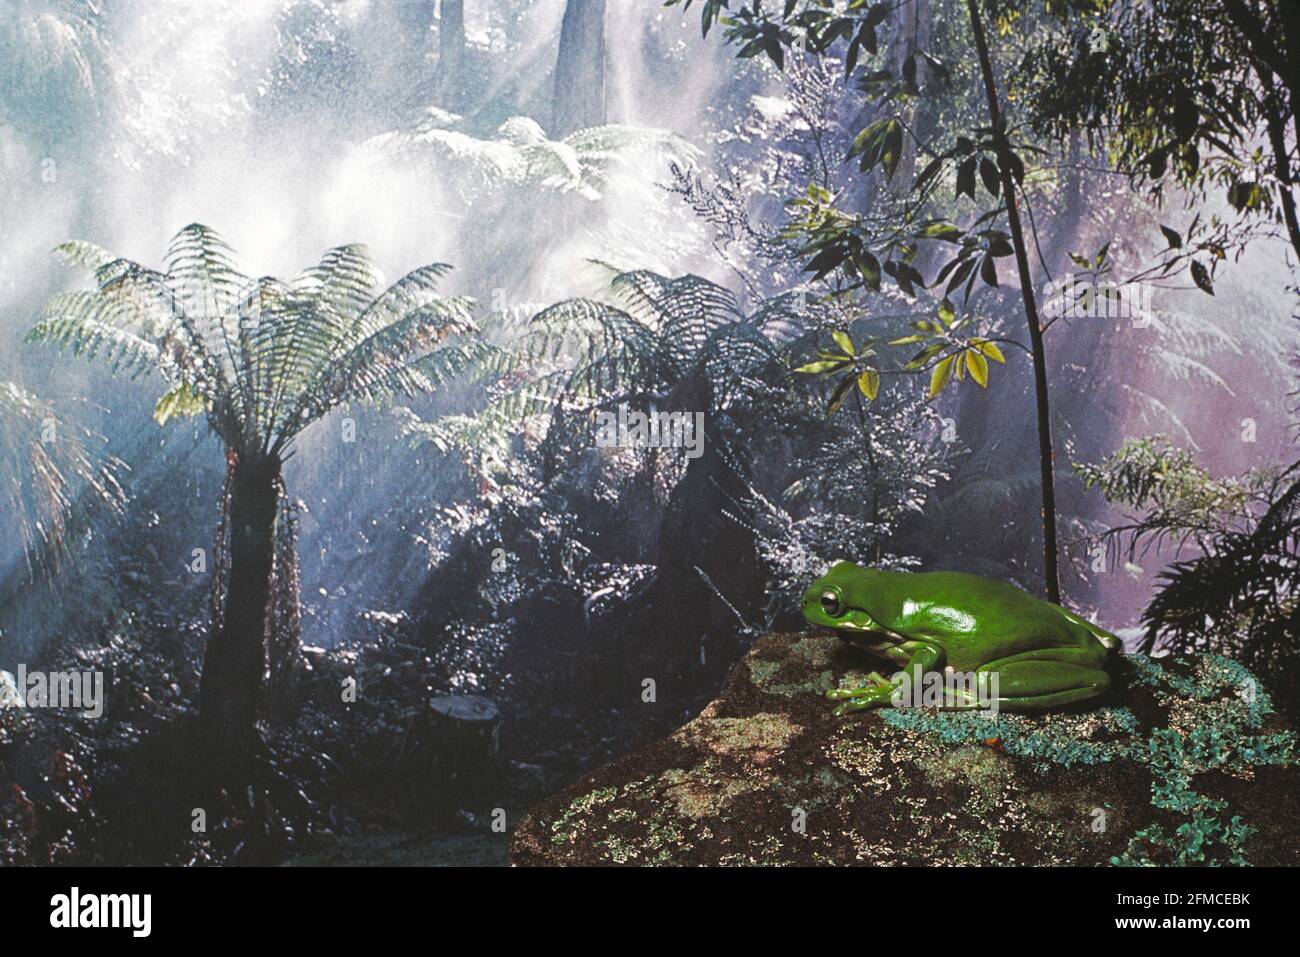 Australia. New South Wales. Rainforest with green tree frog. Stock Photo